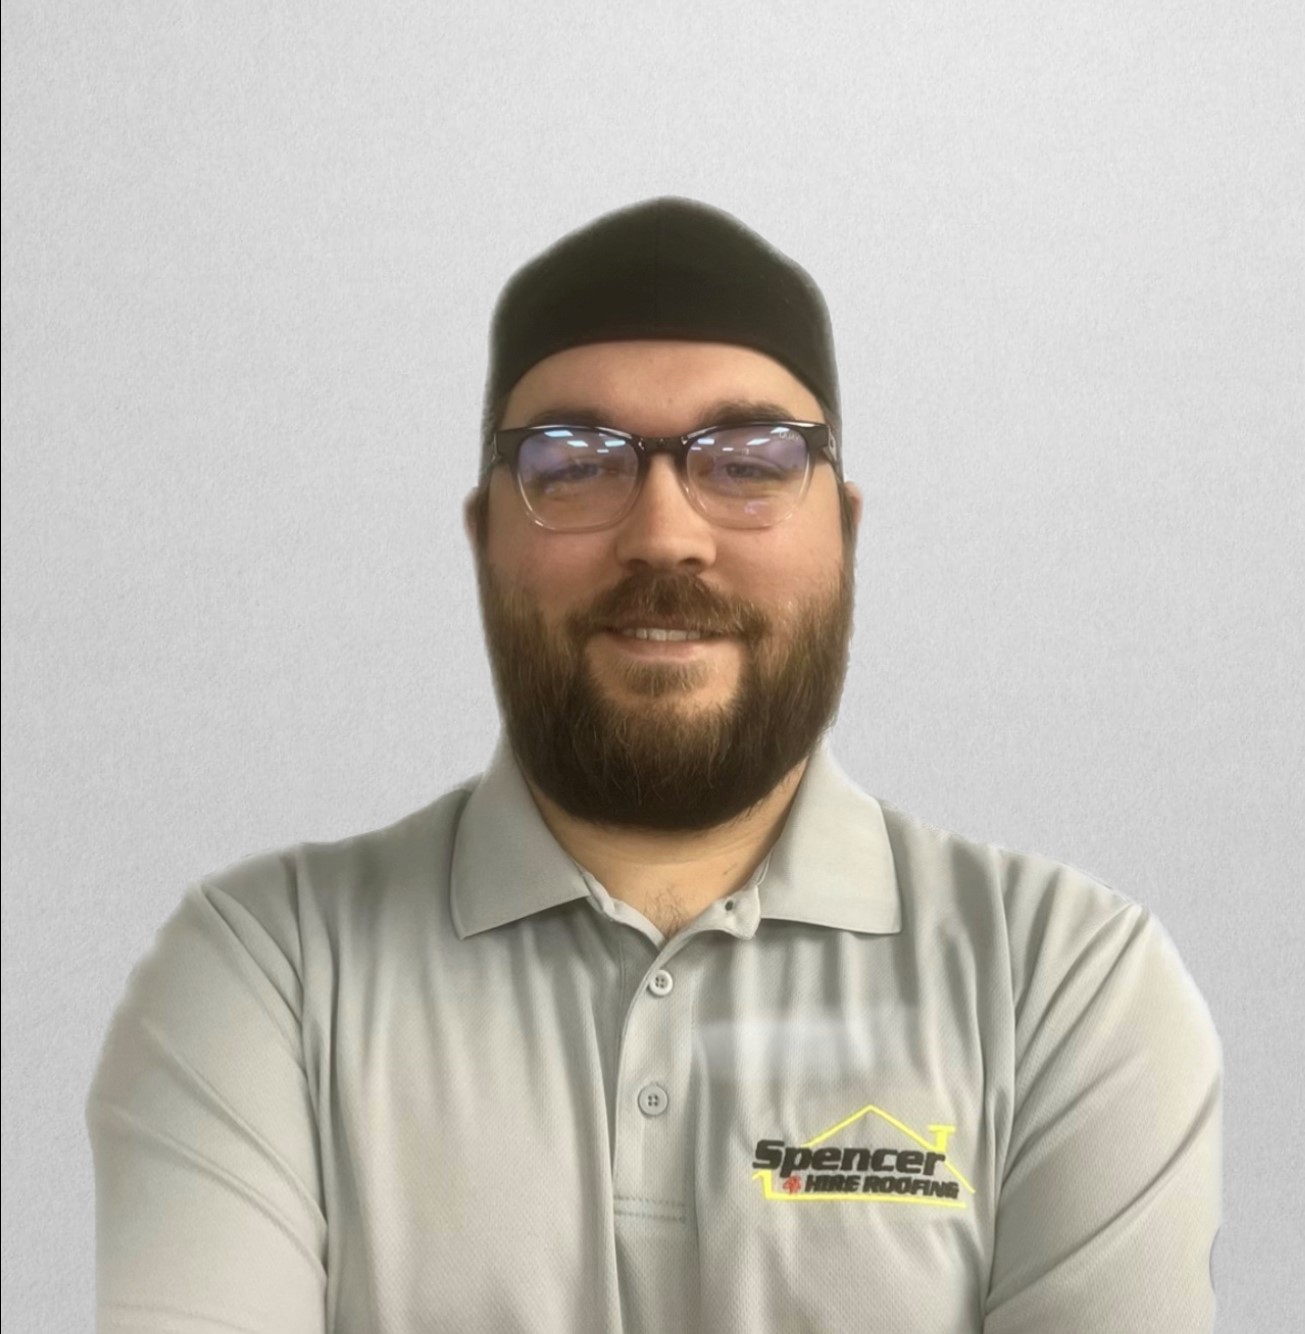 Employee at Spencer 4 Hire Roofing